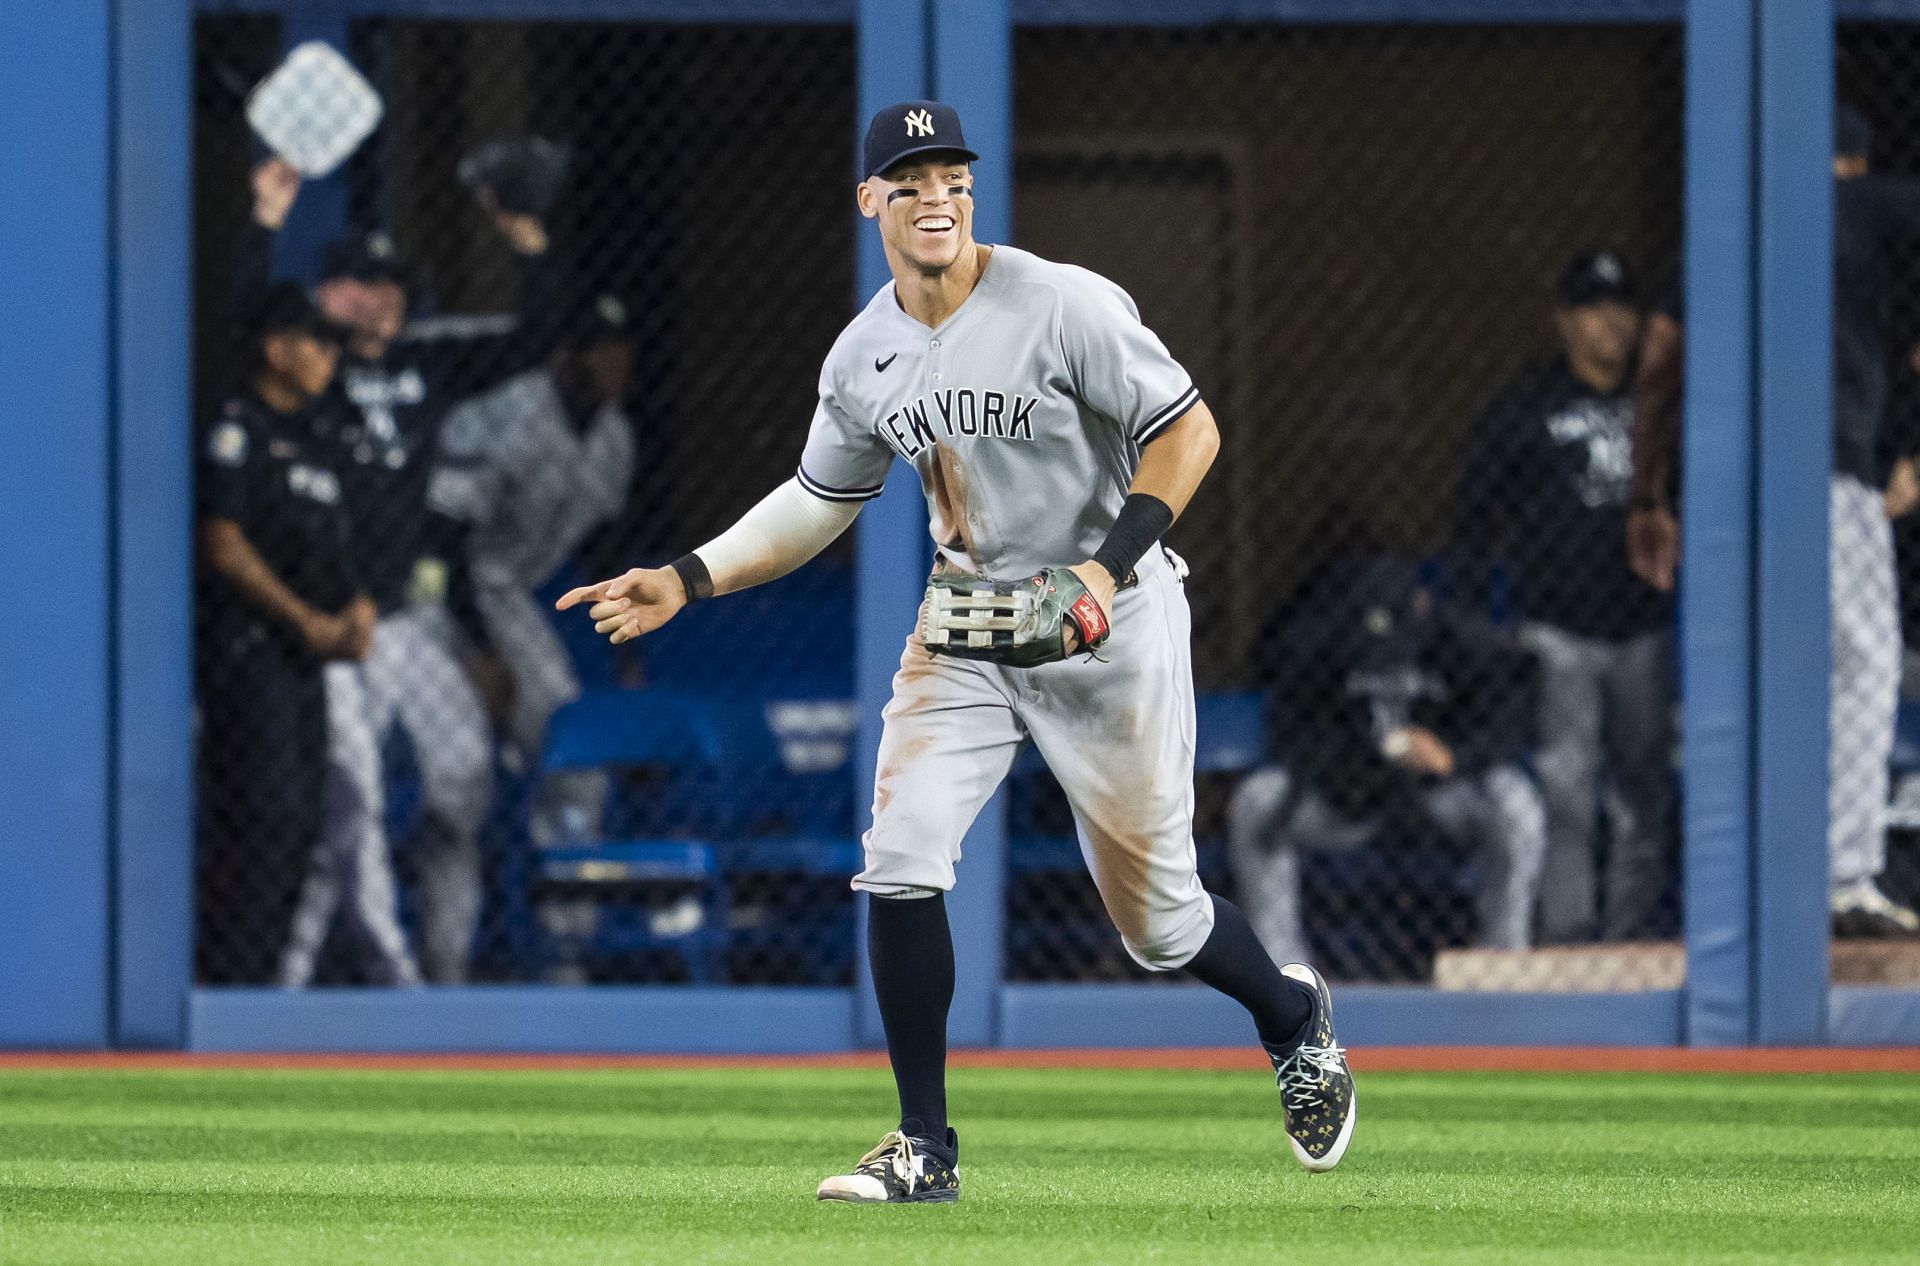 Aaron Judge is one home run short of the all-time record of 61 held by Roger Maris from 1961.